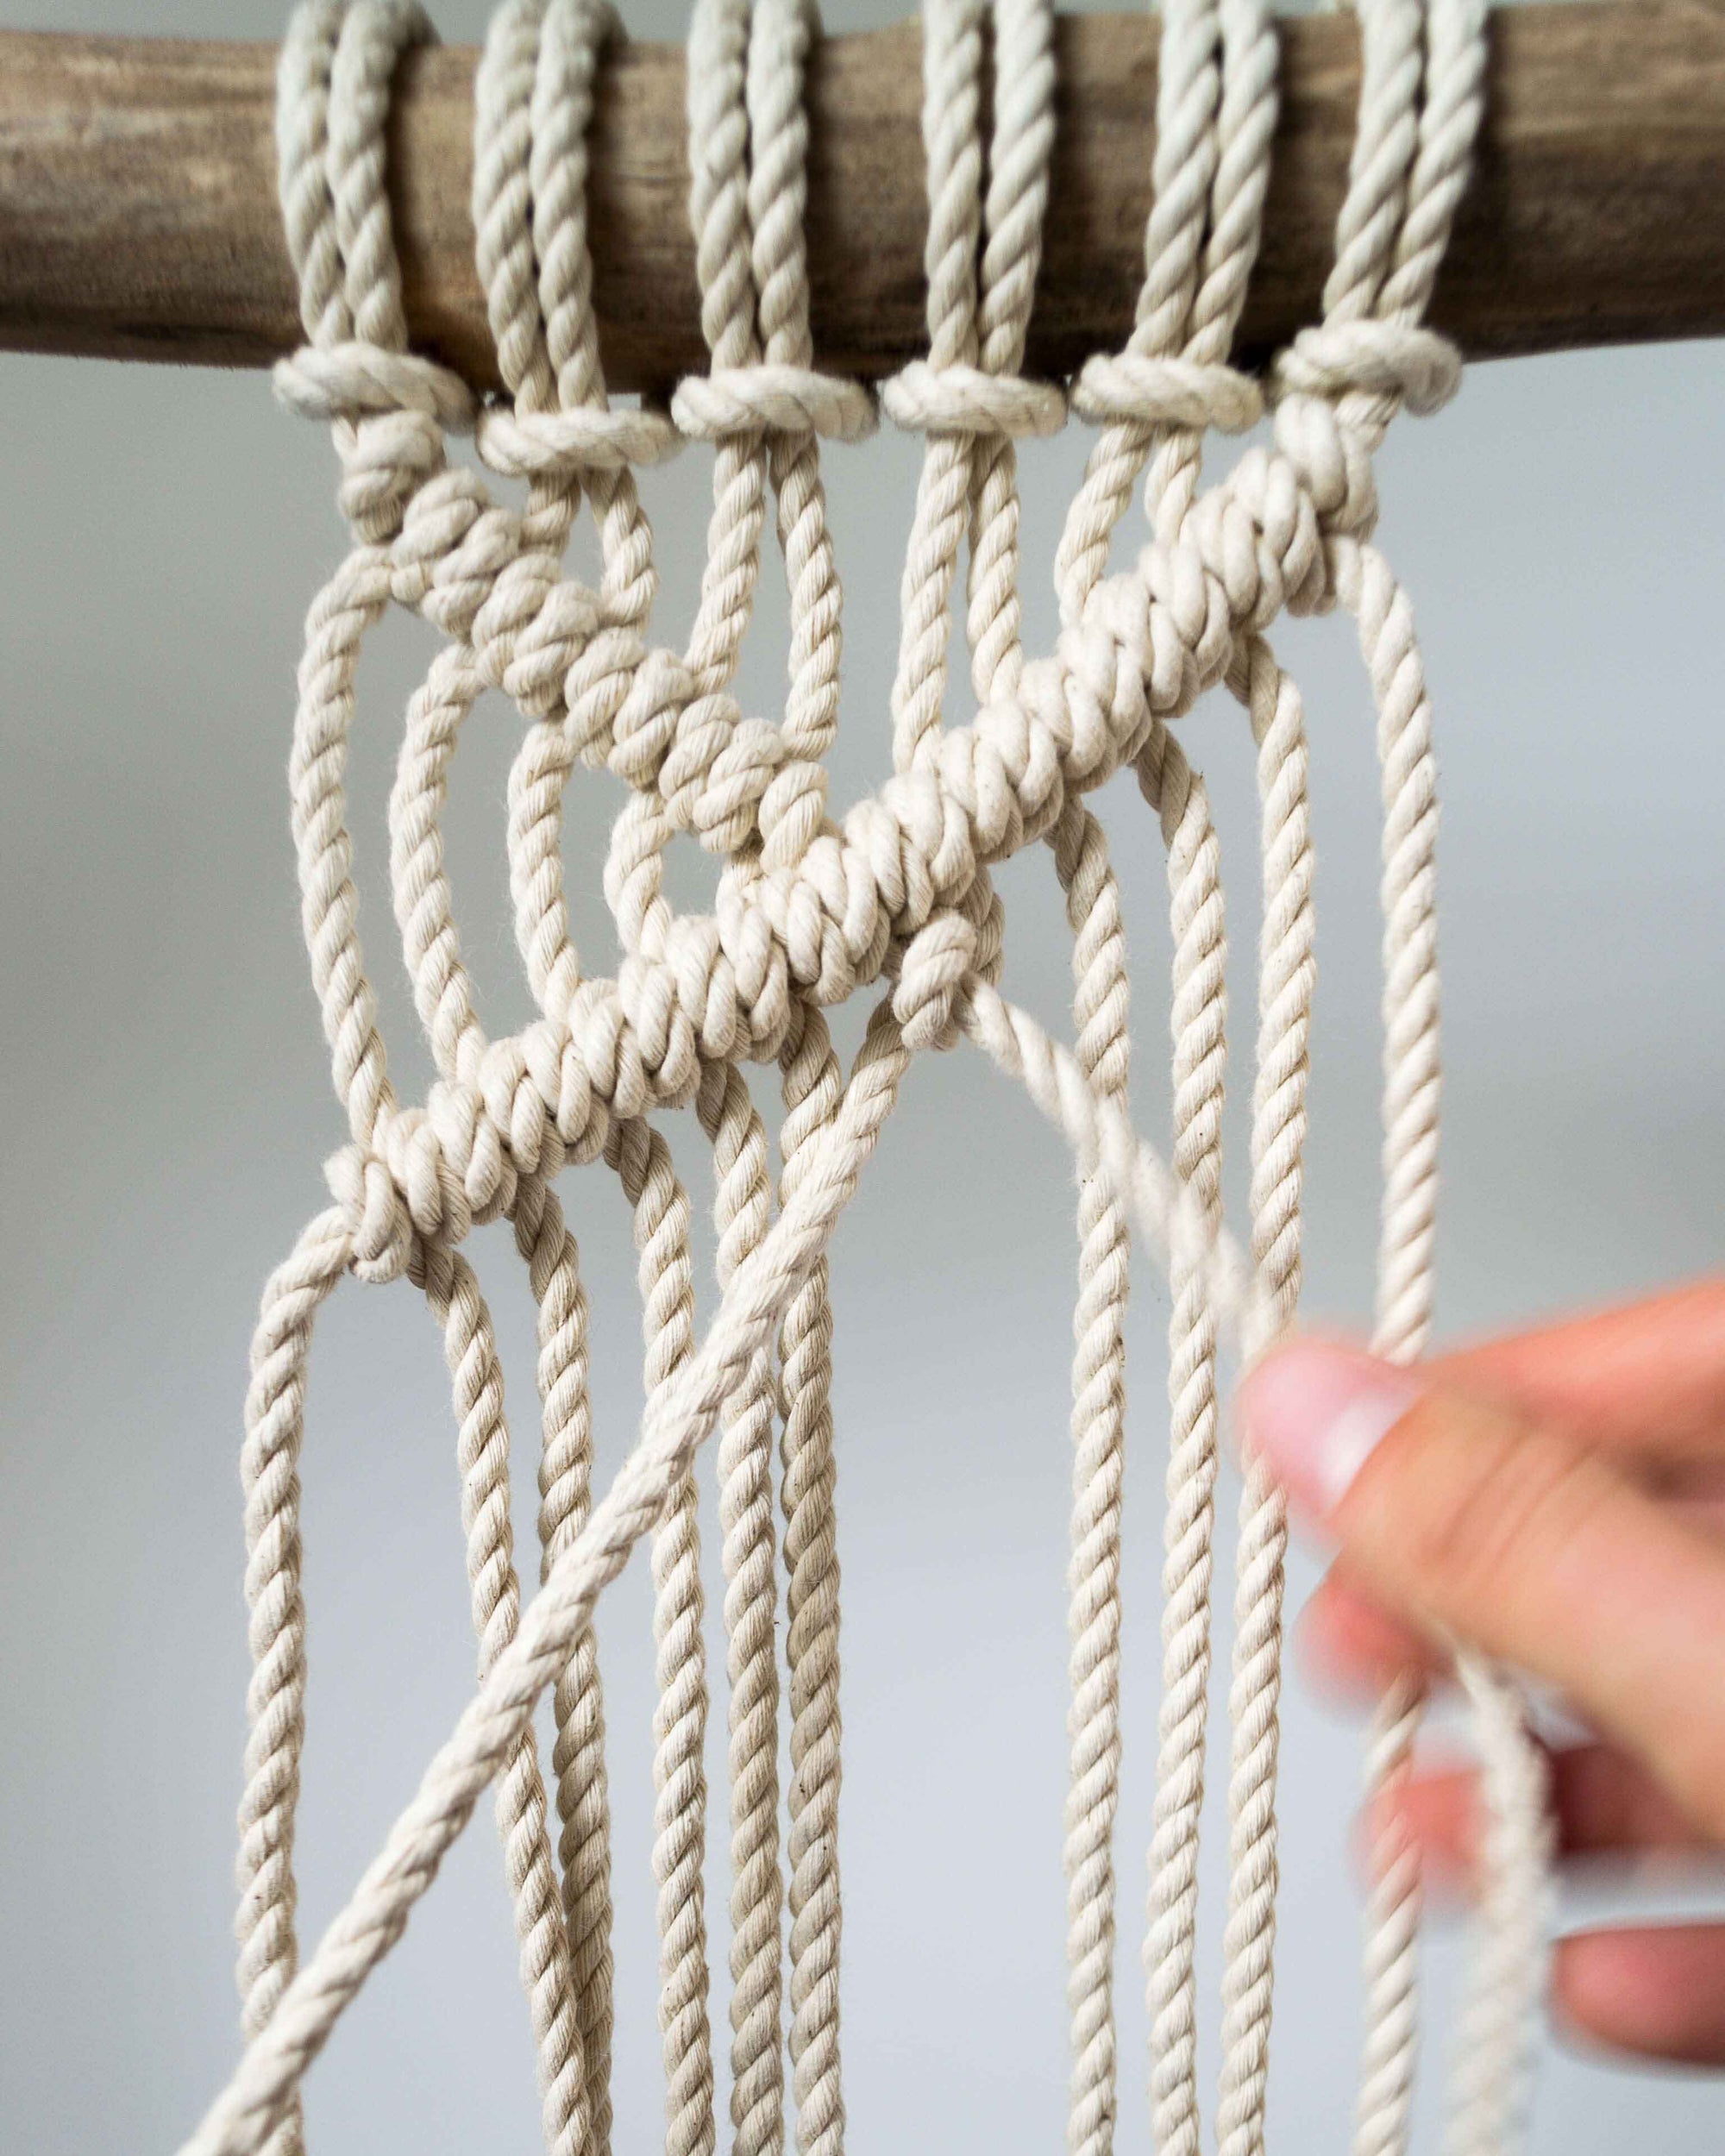 The comprehensive guide to Macrame Knots